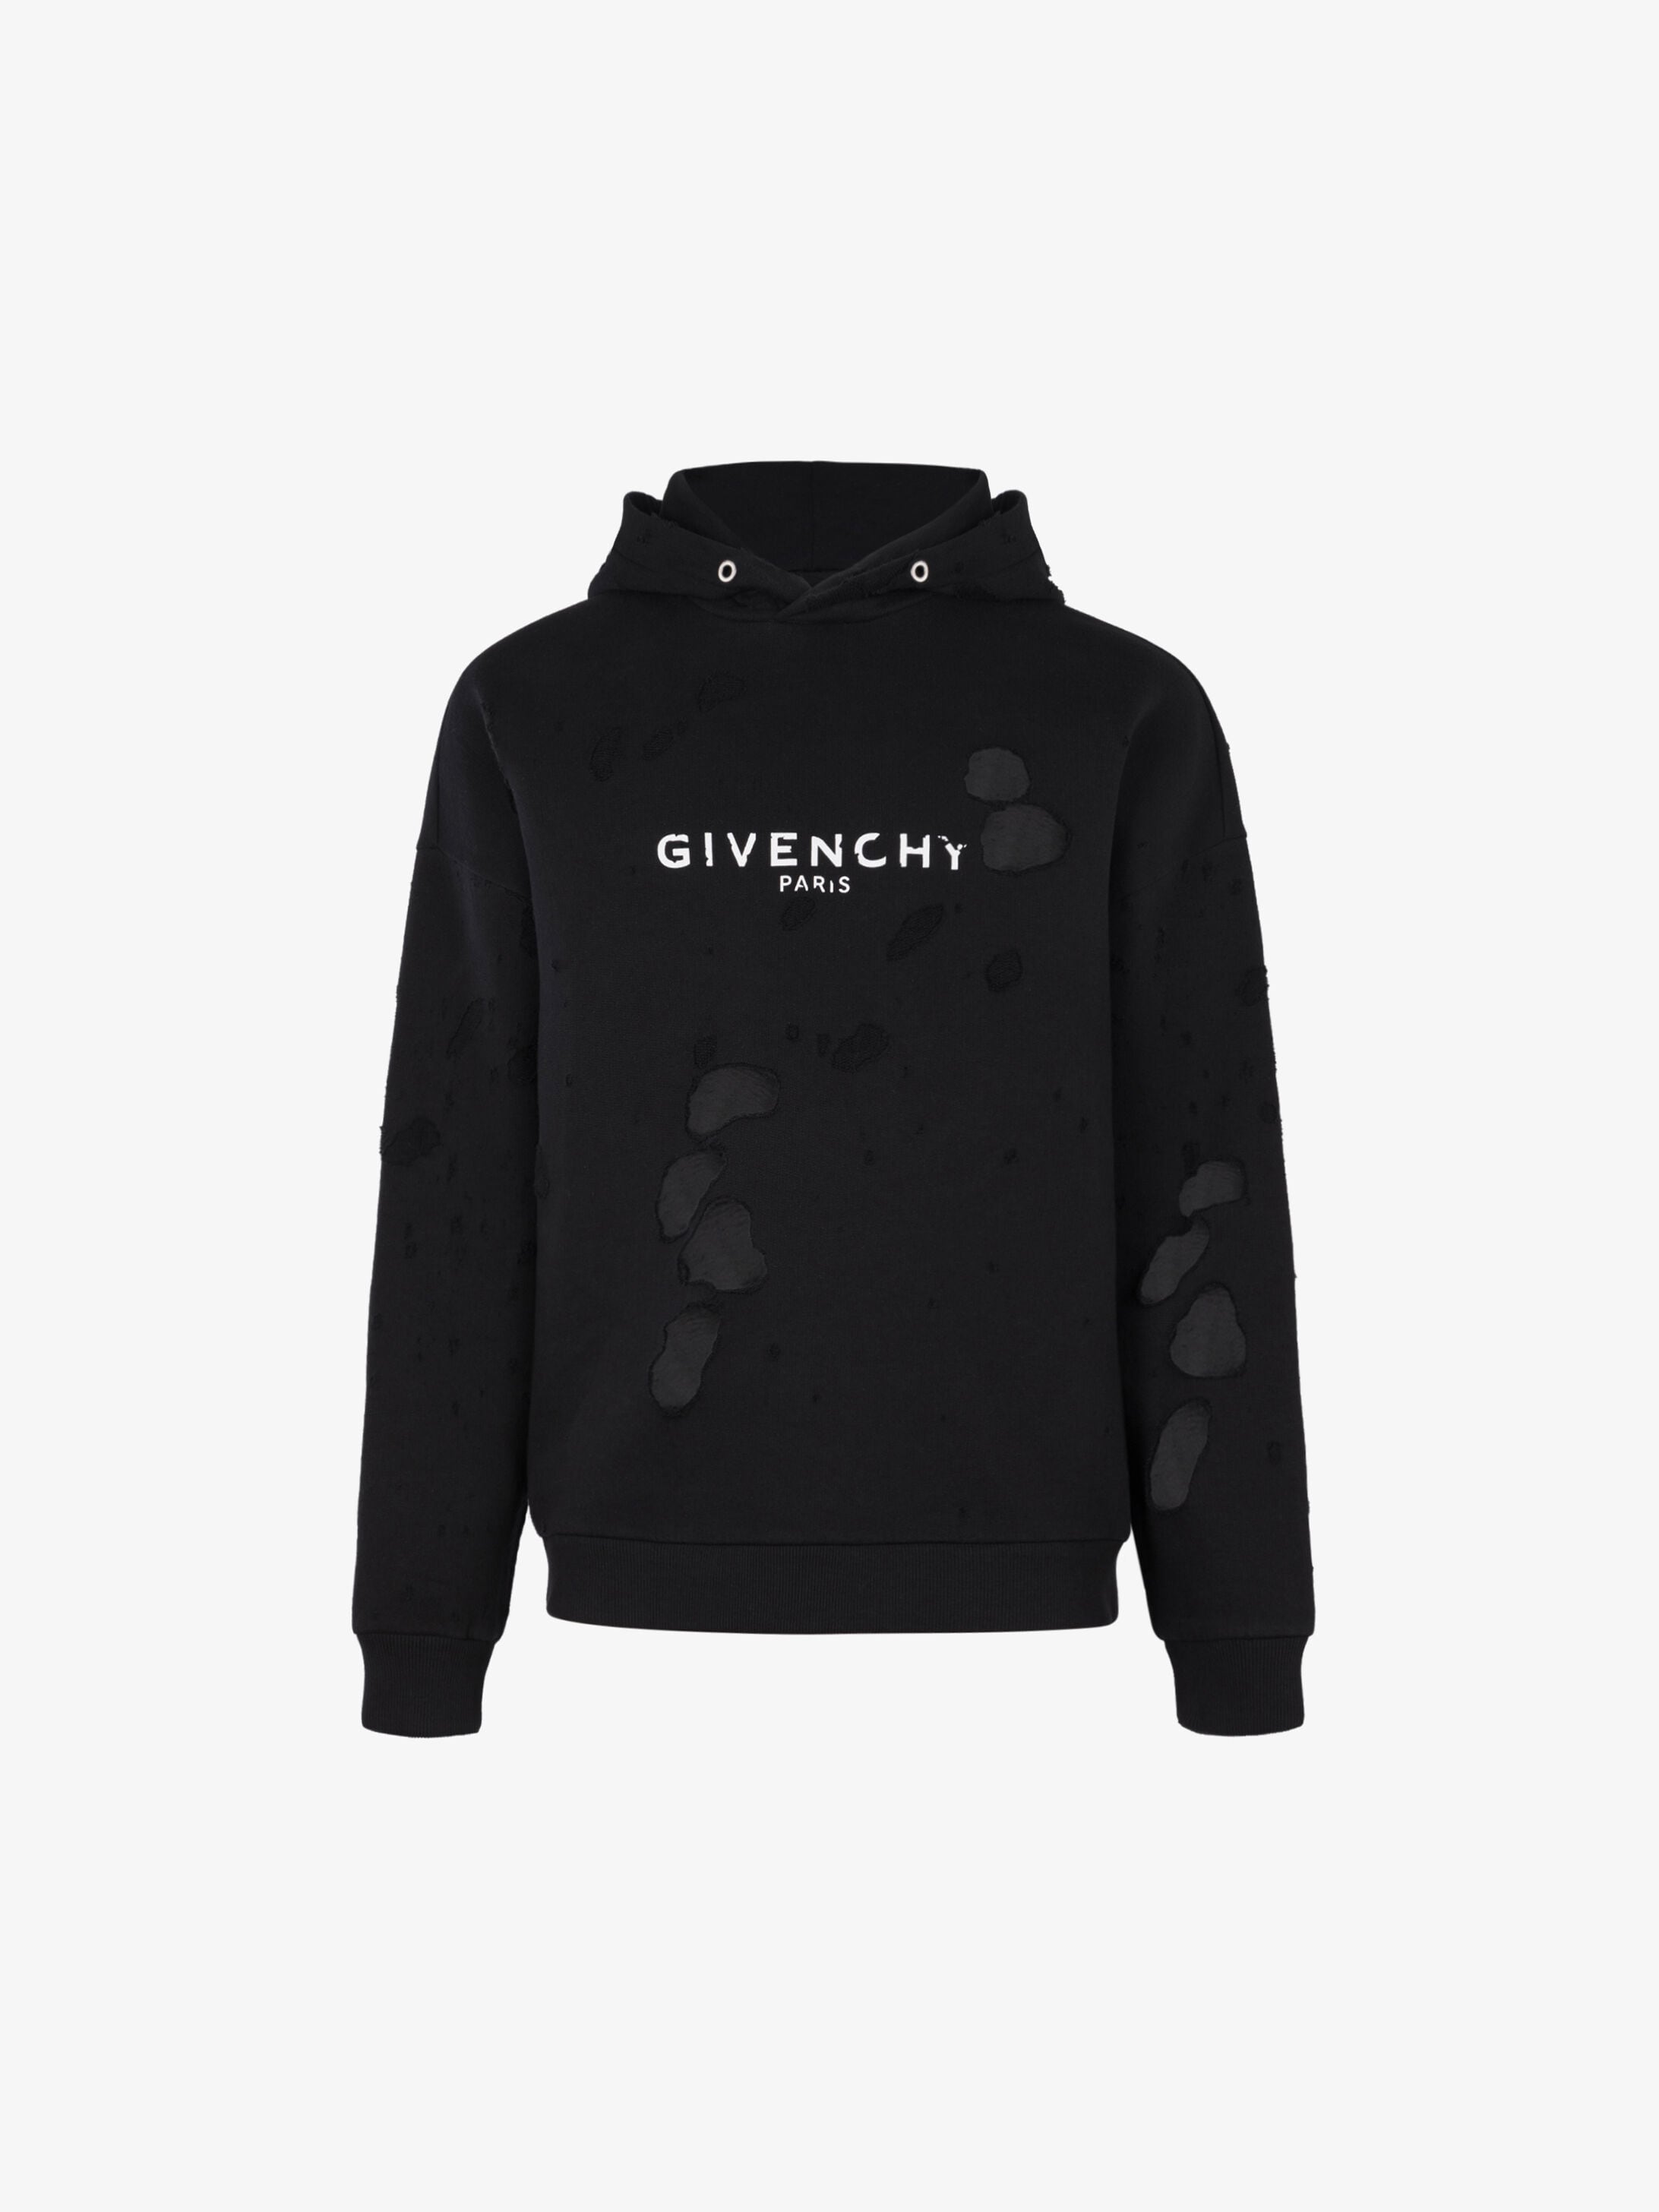 GIVENCHY PARIS destroyed hoodie 